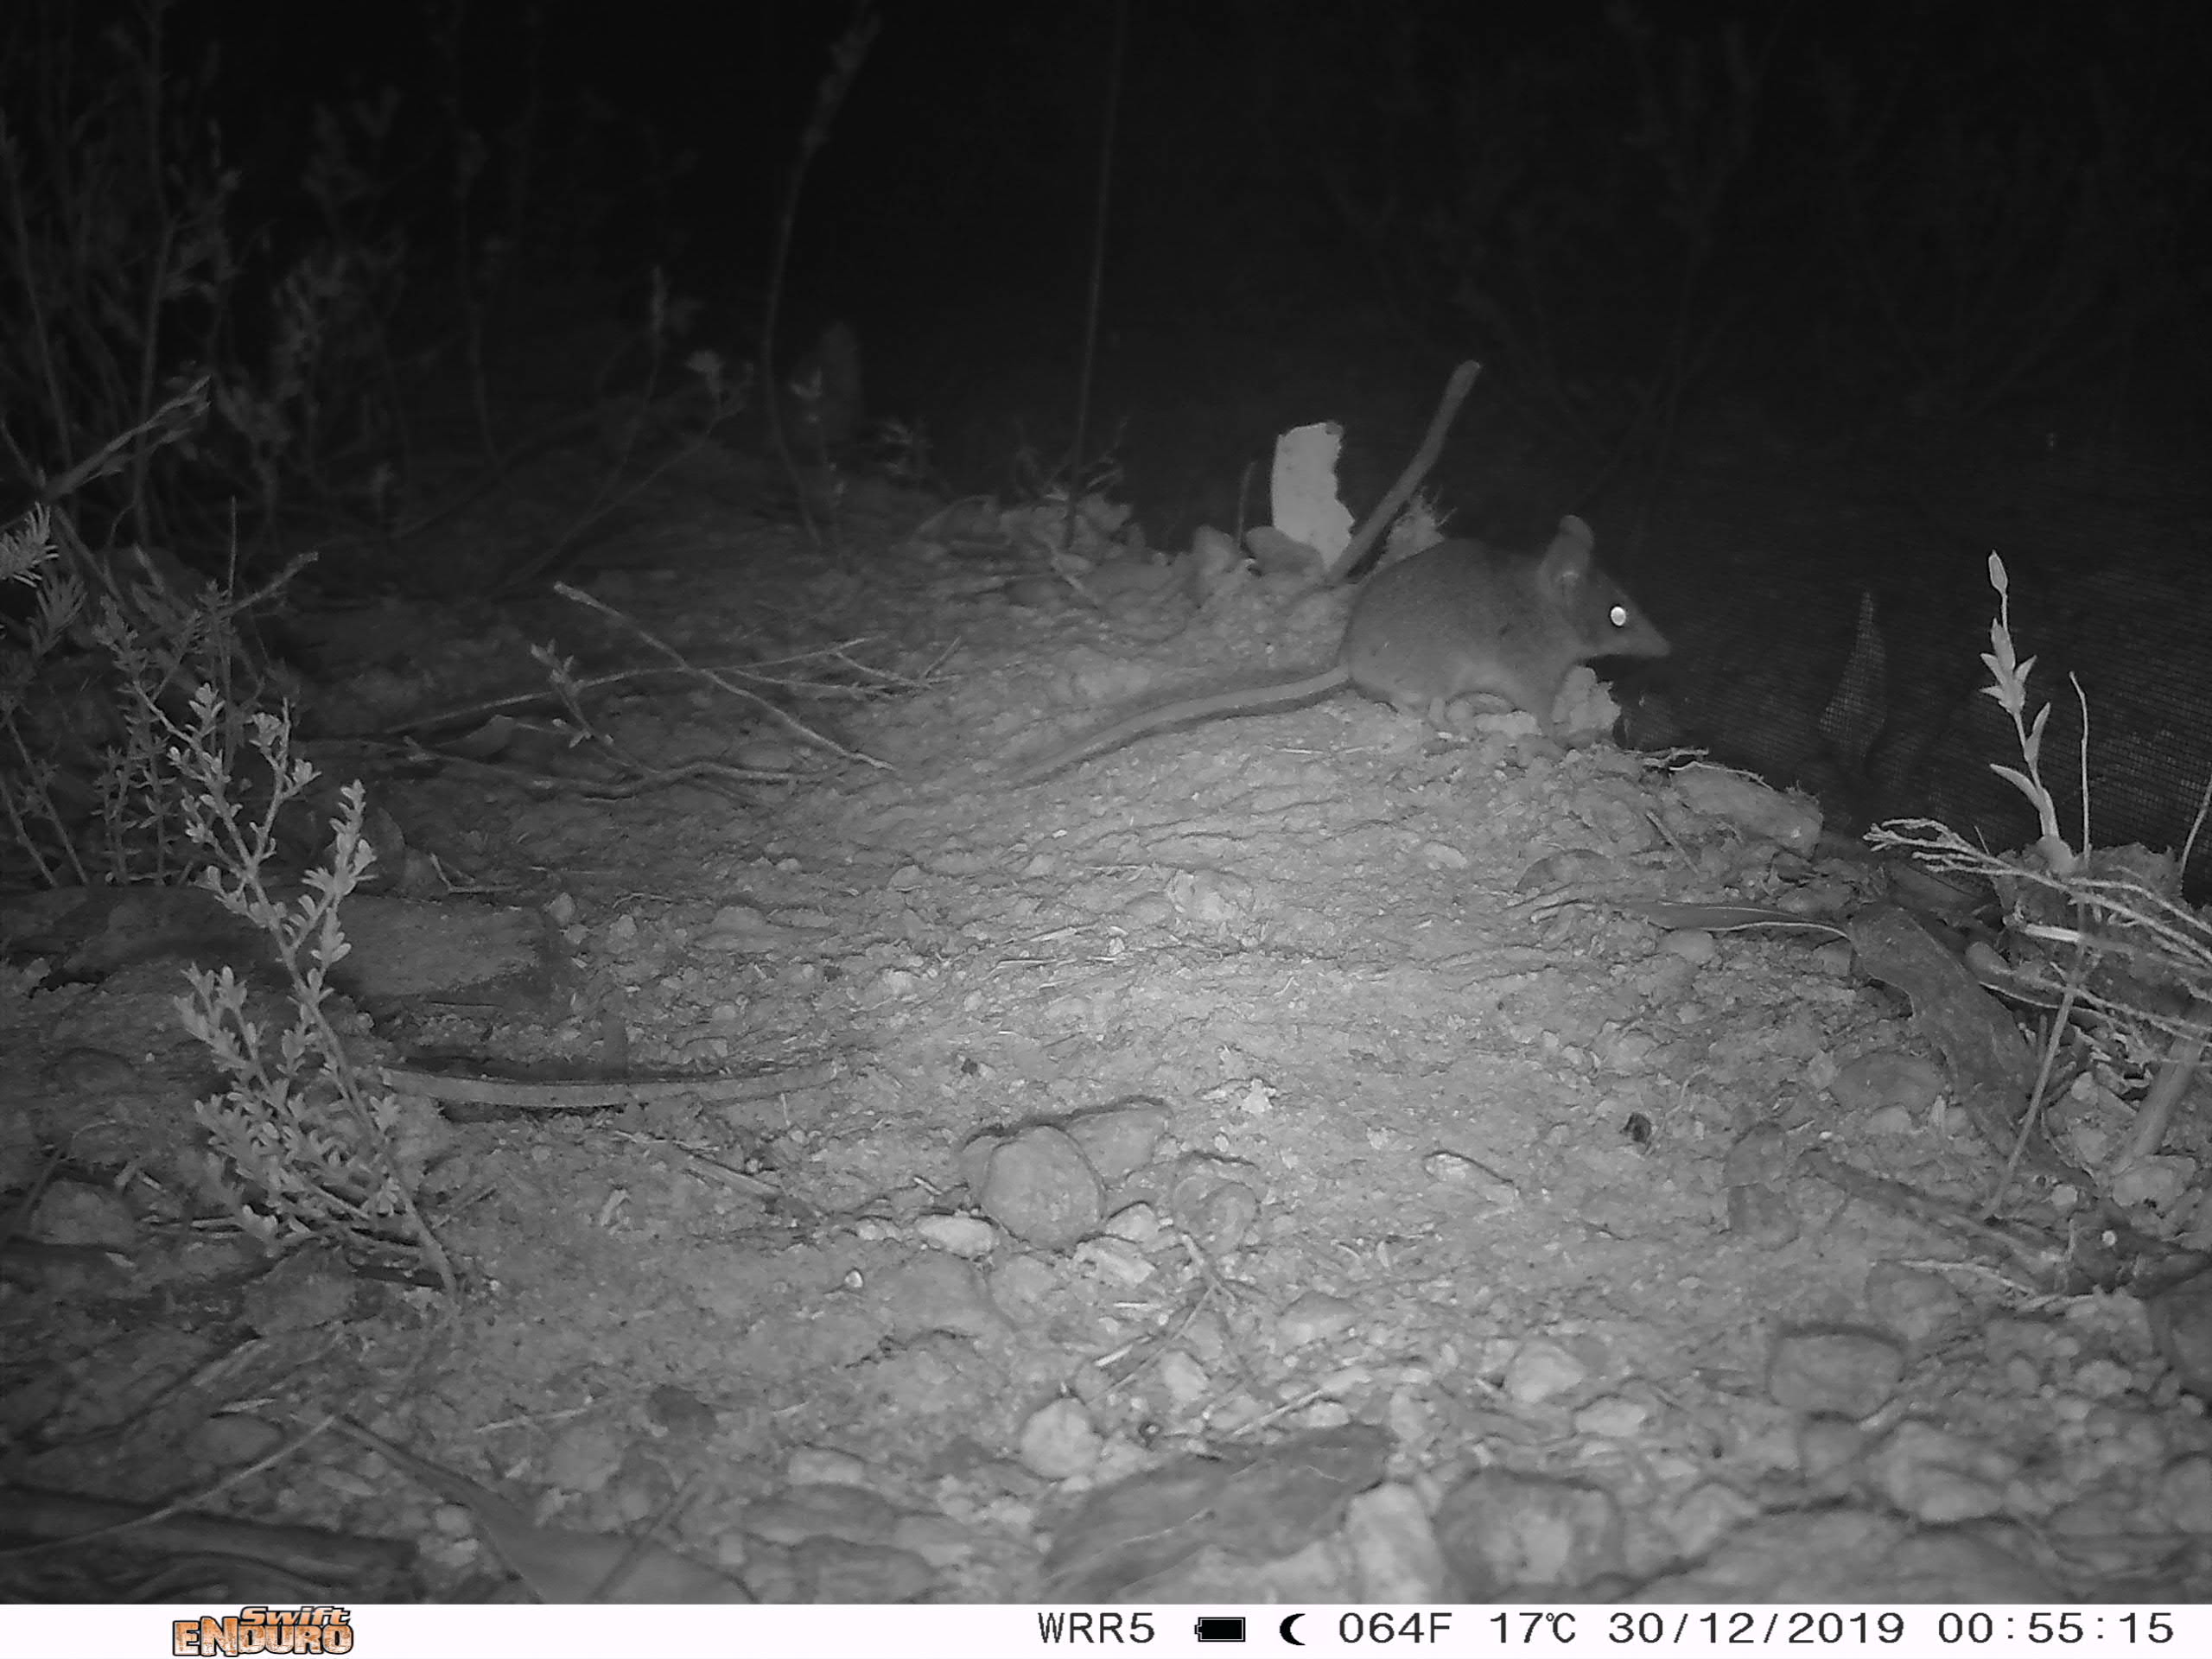 A Kangaroo Island dunnart captured by Land for Wildlife cameras after fires in the area. (Kangaroo Island Land for Wildlife)